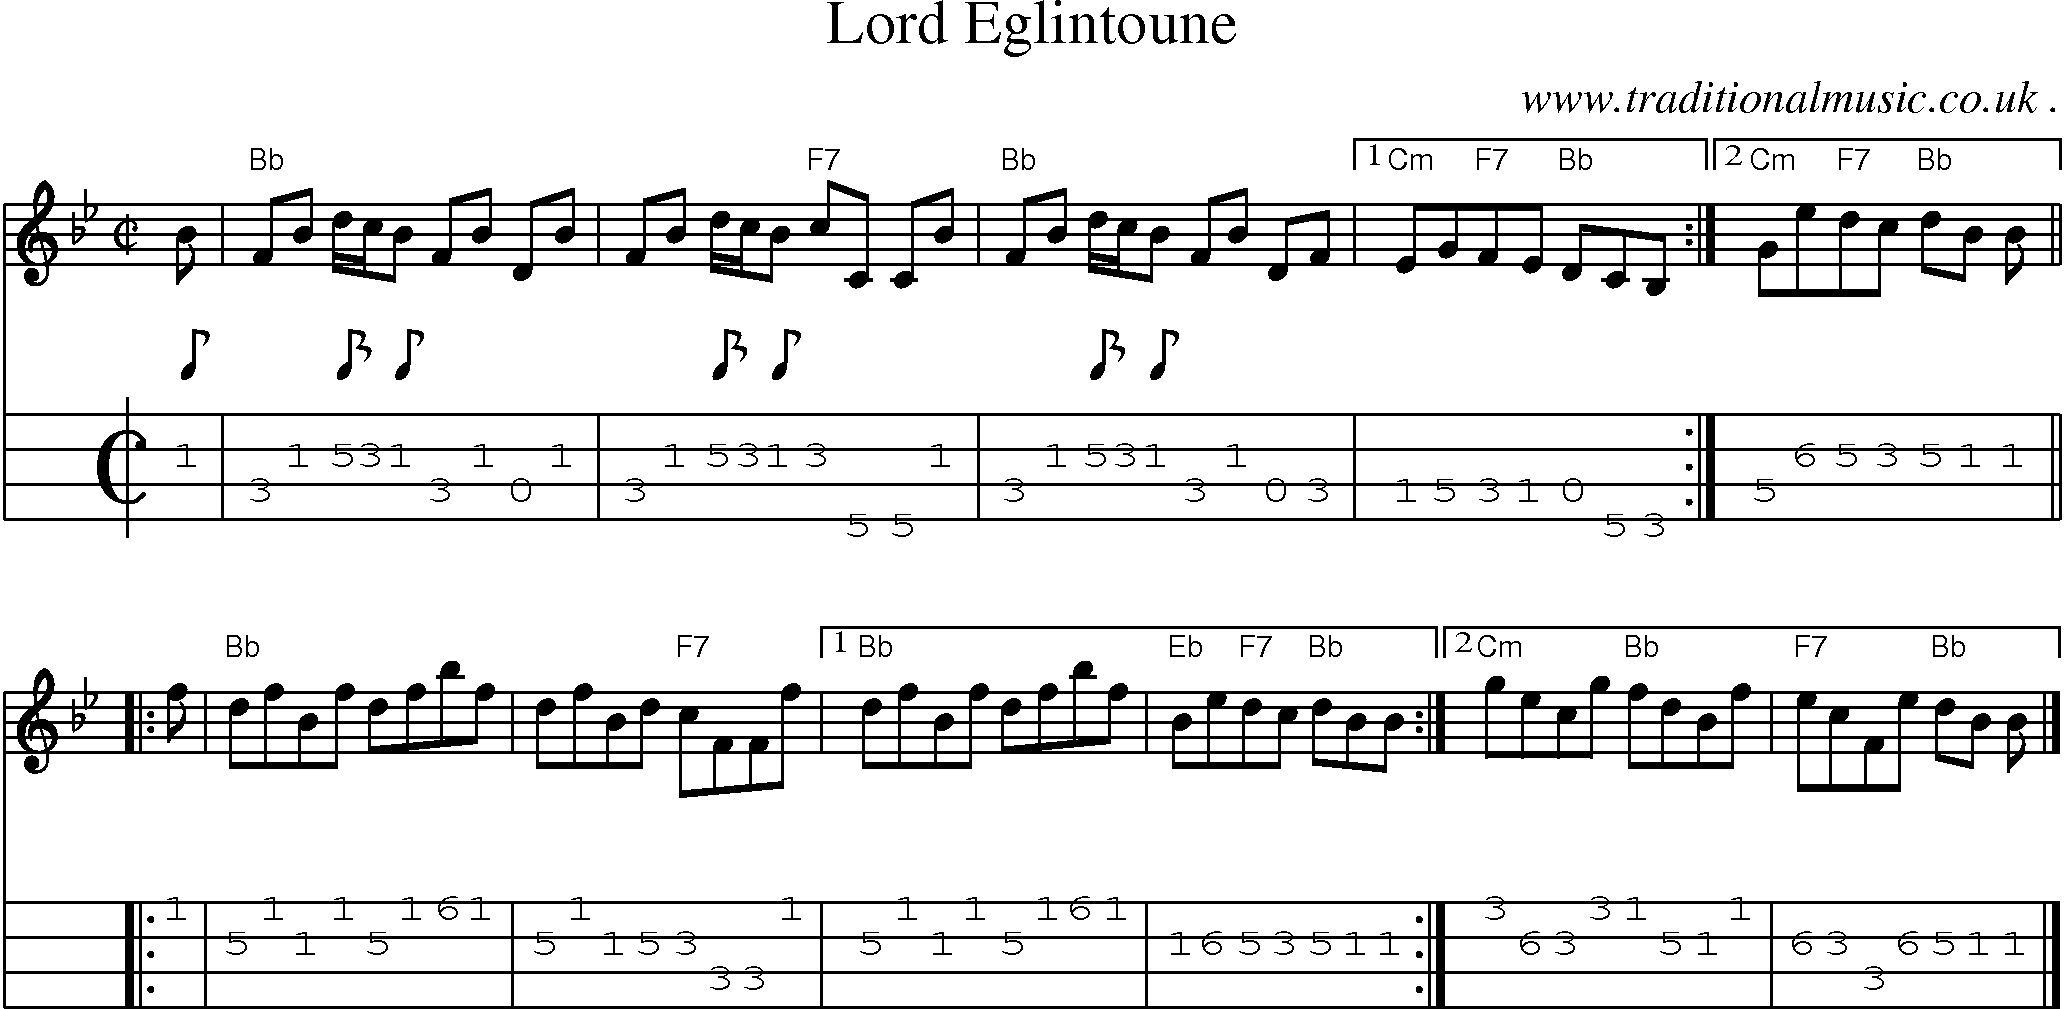 Sheet-music  score, Chords and Mandolin Tabs for Lord Eglintoune